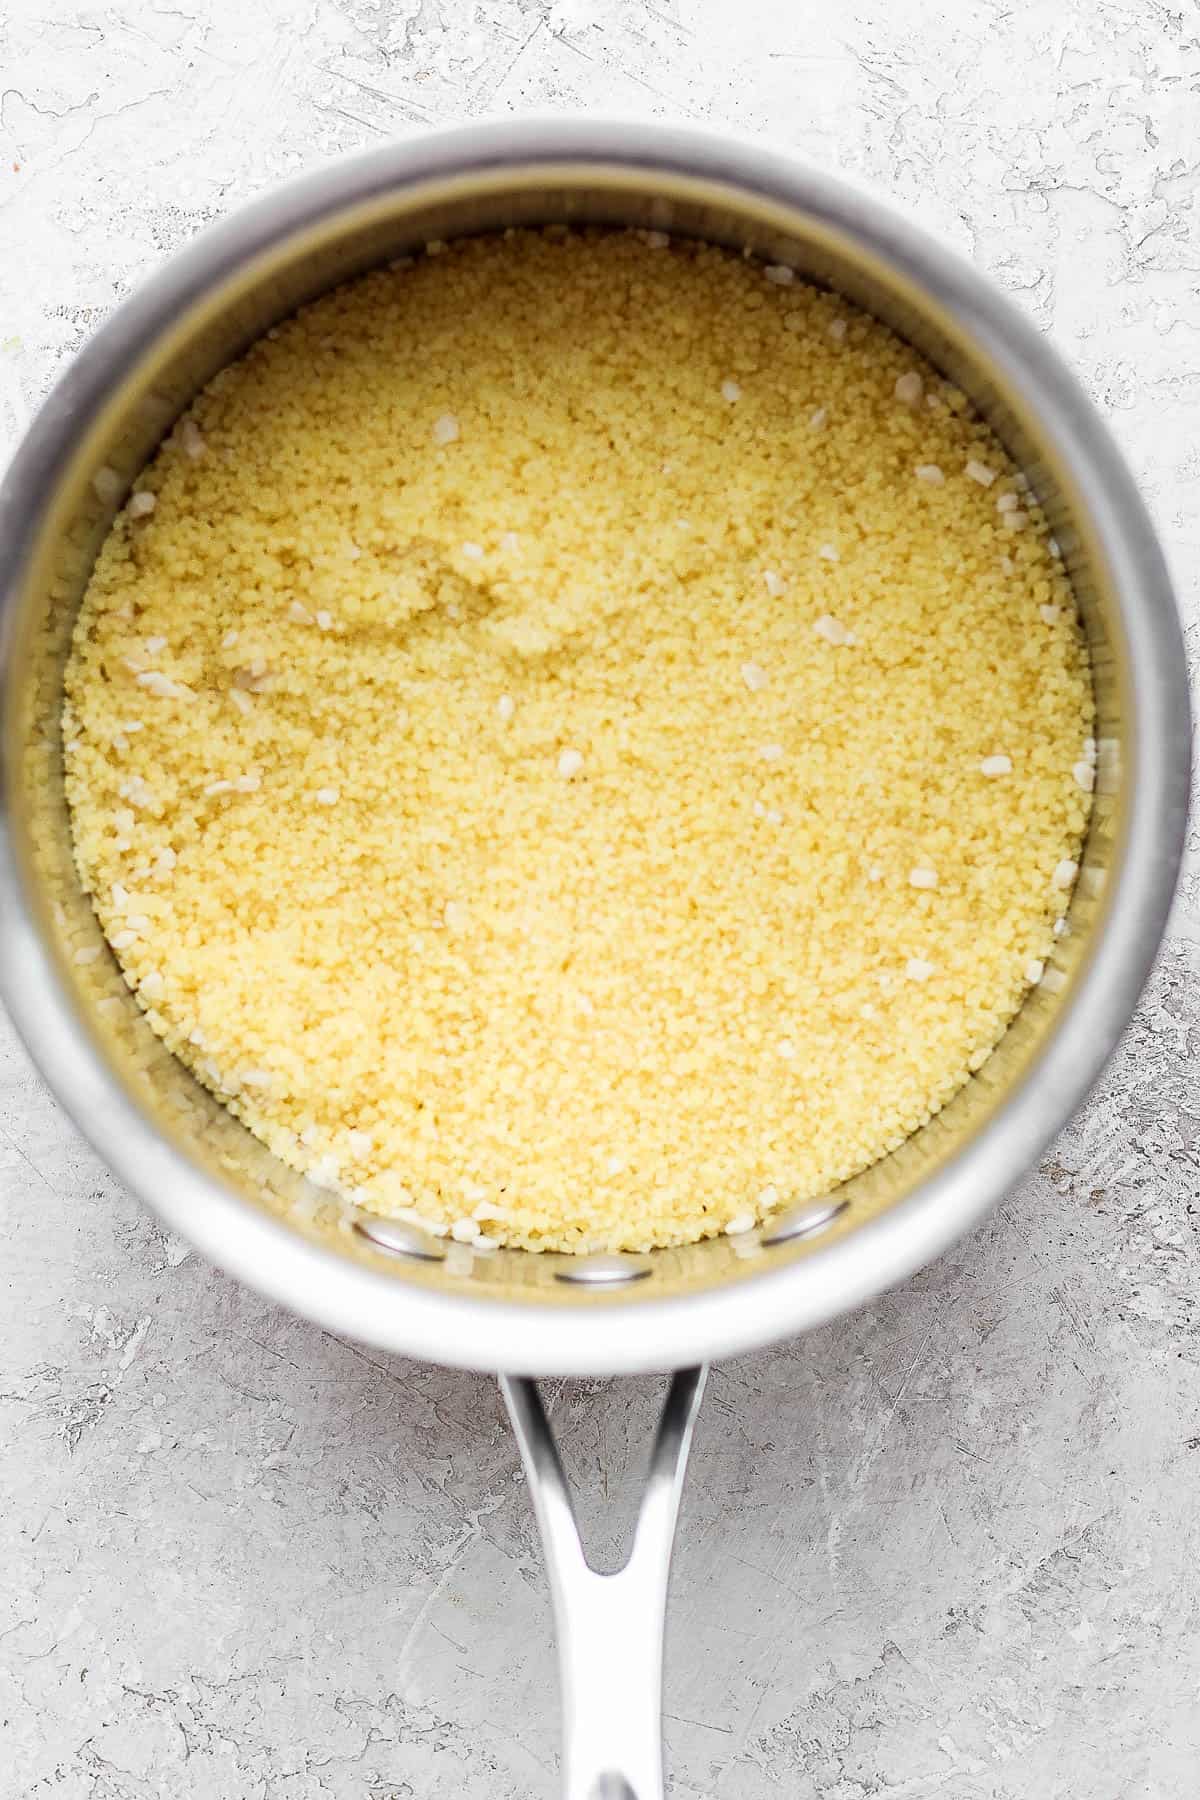 Steamed couscous in the sauce pan.